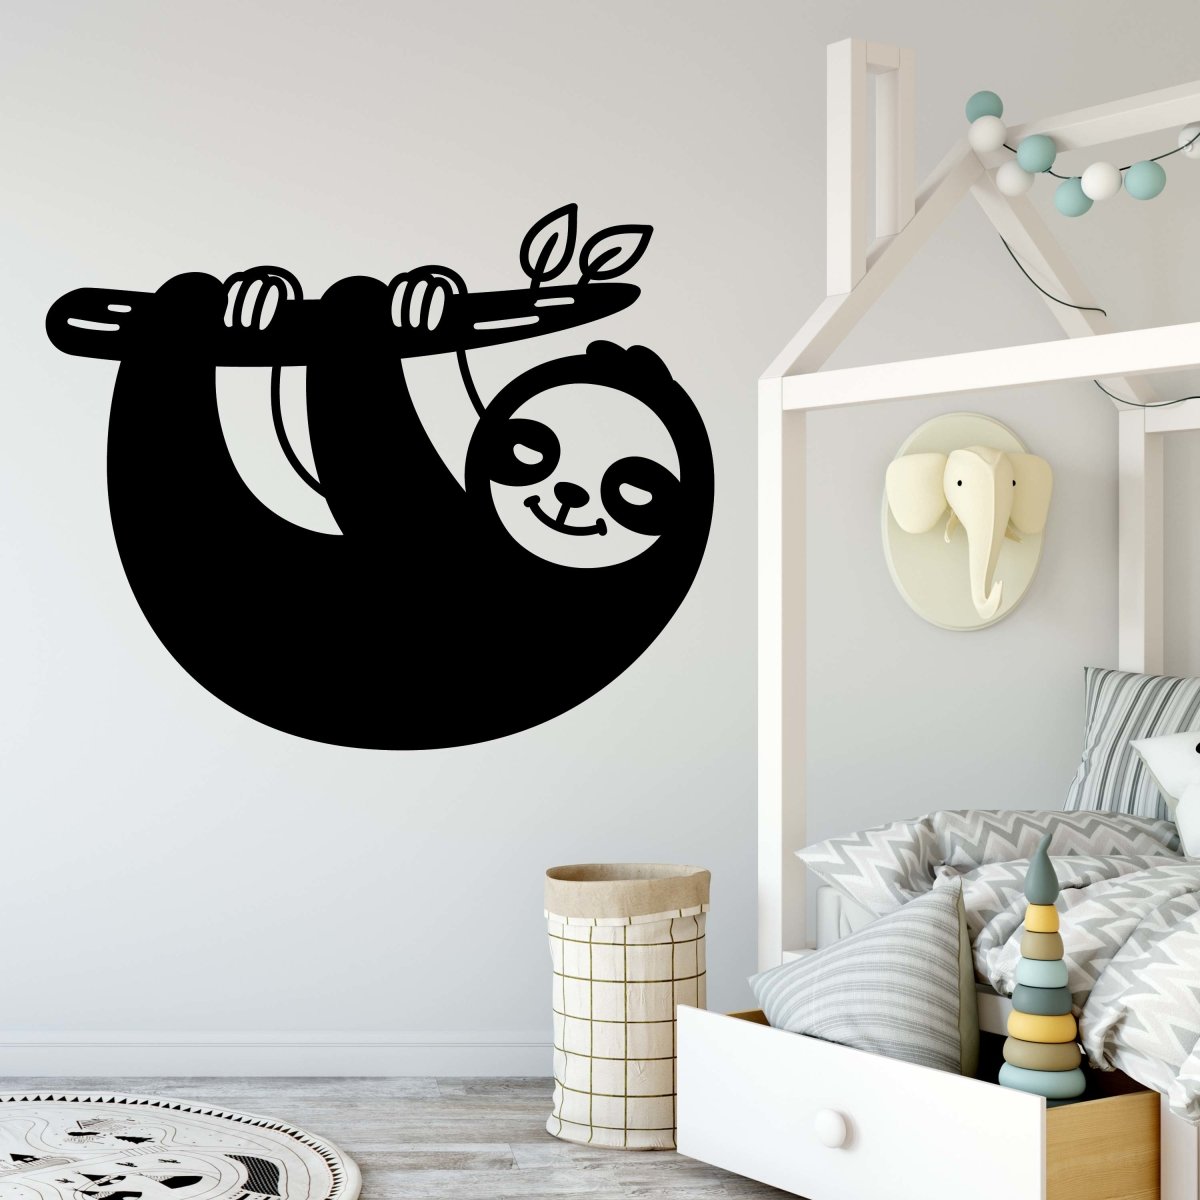 Discover the branch sloth a WT00000070 decal wall on